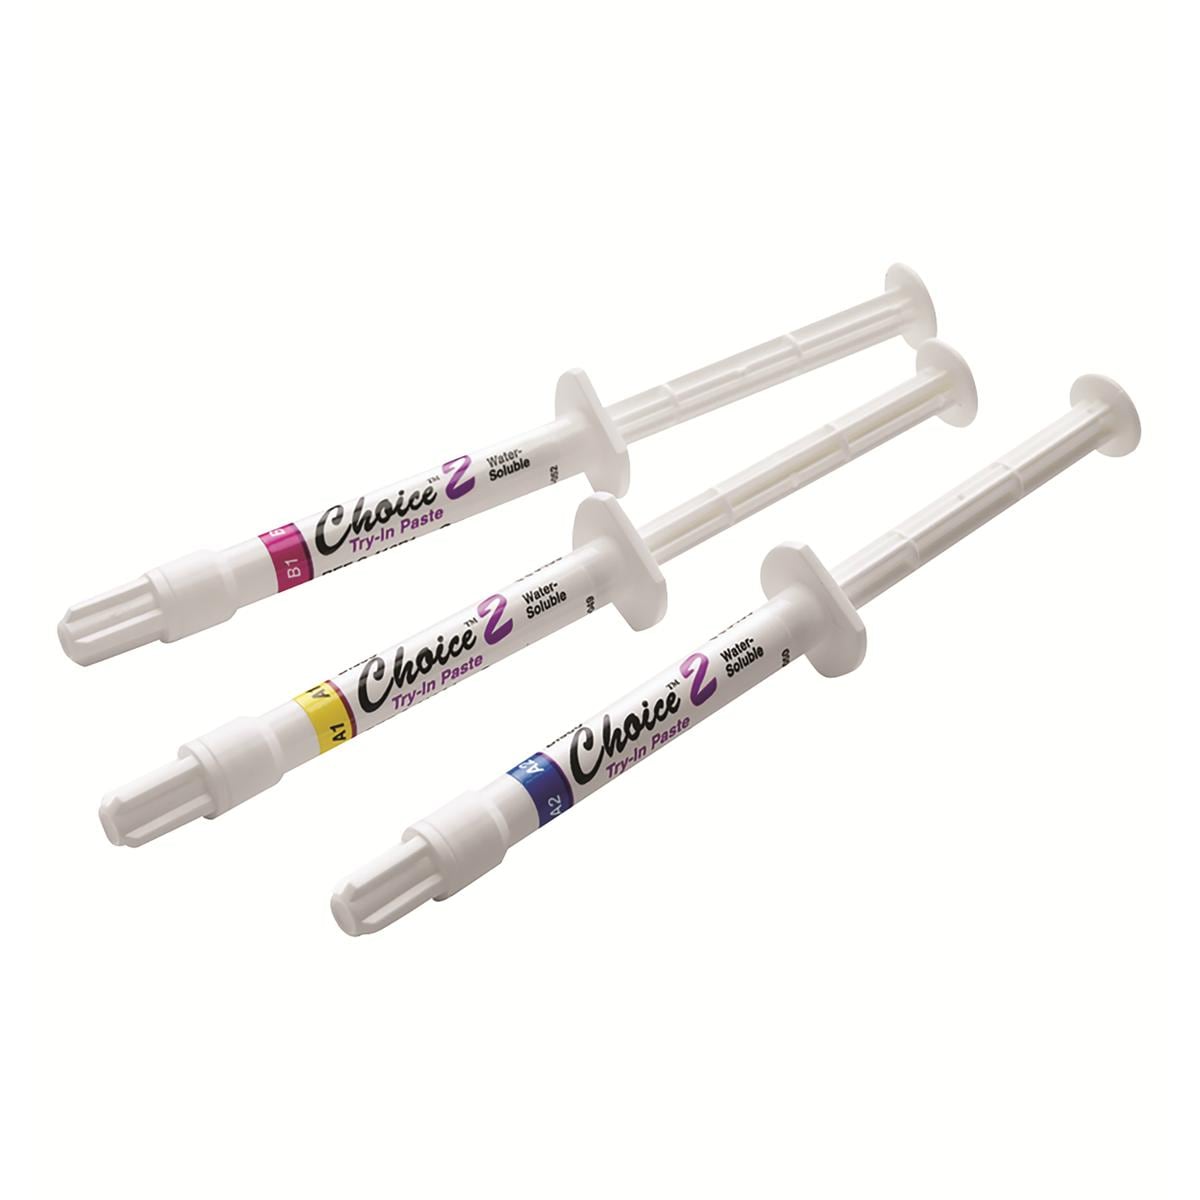 Choice 2 Try In Paste Syringe 2g A1